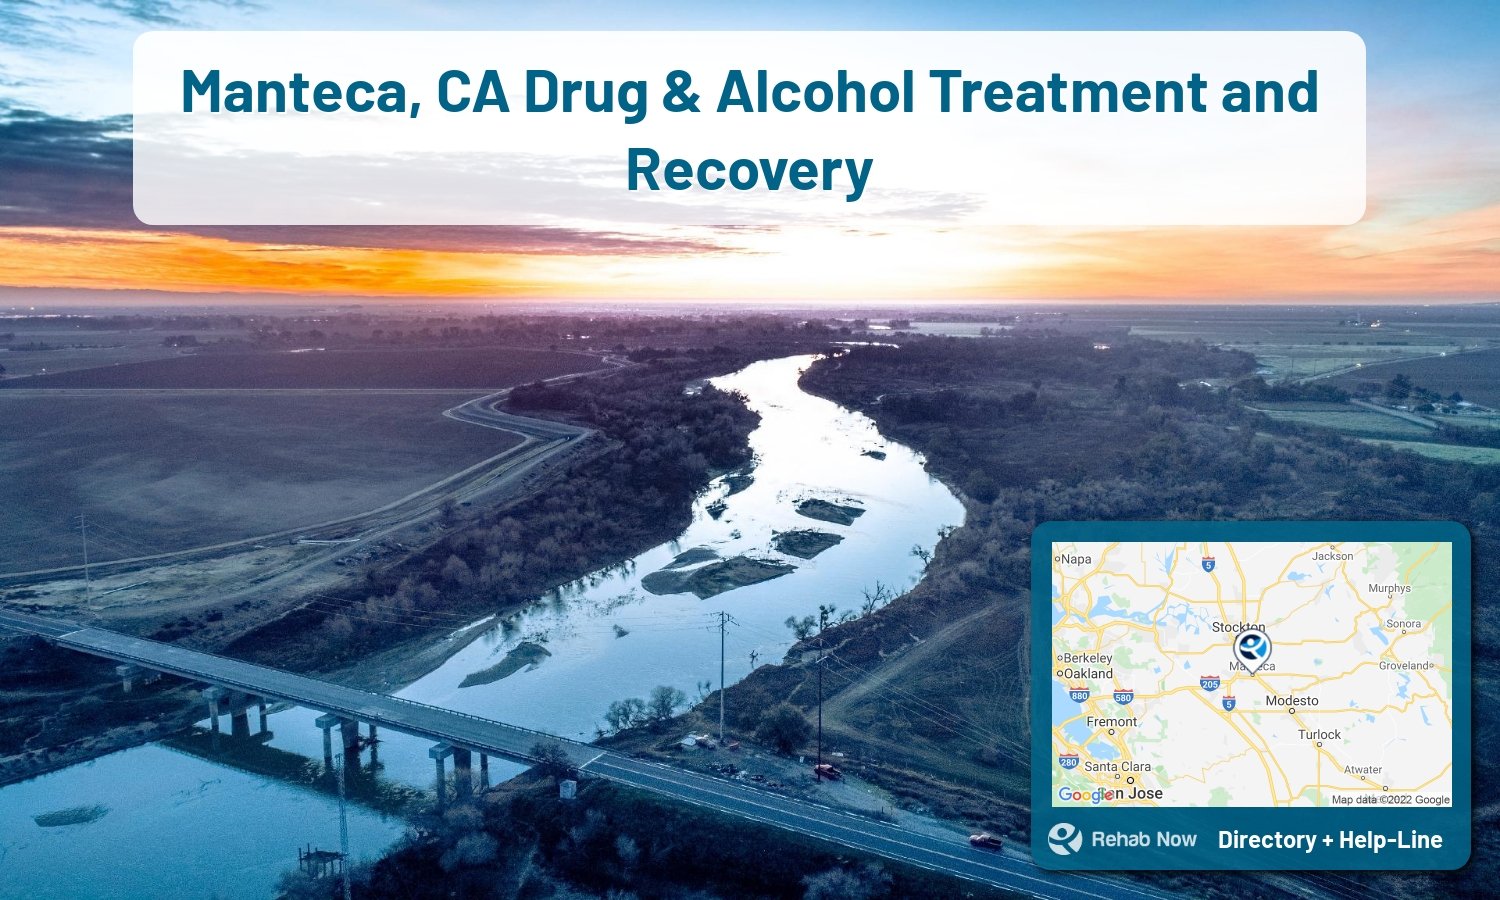 List of alcohol and drug treatment centers near you in Manteca, California. Research certifications, programs, methods, pricing, and more.